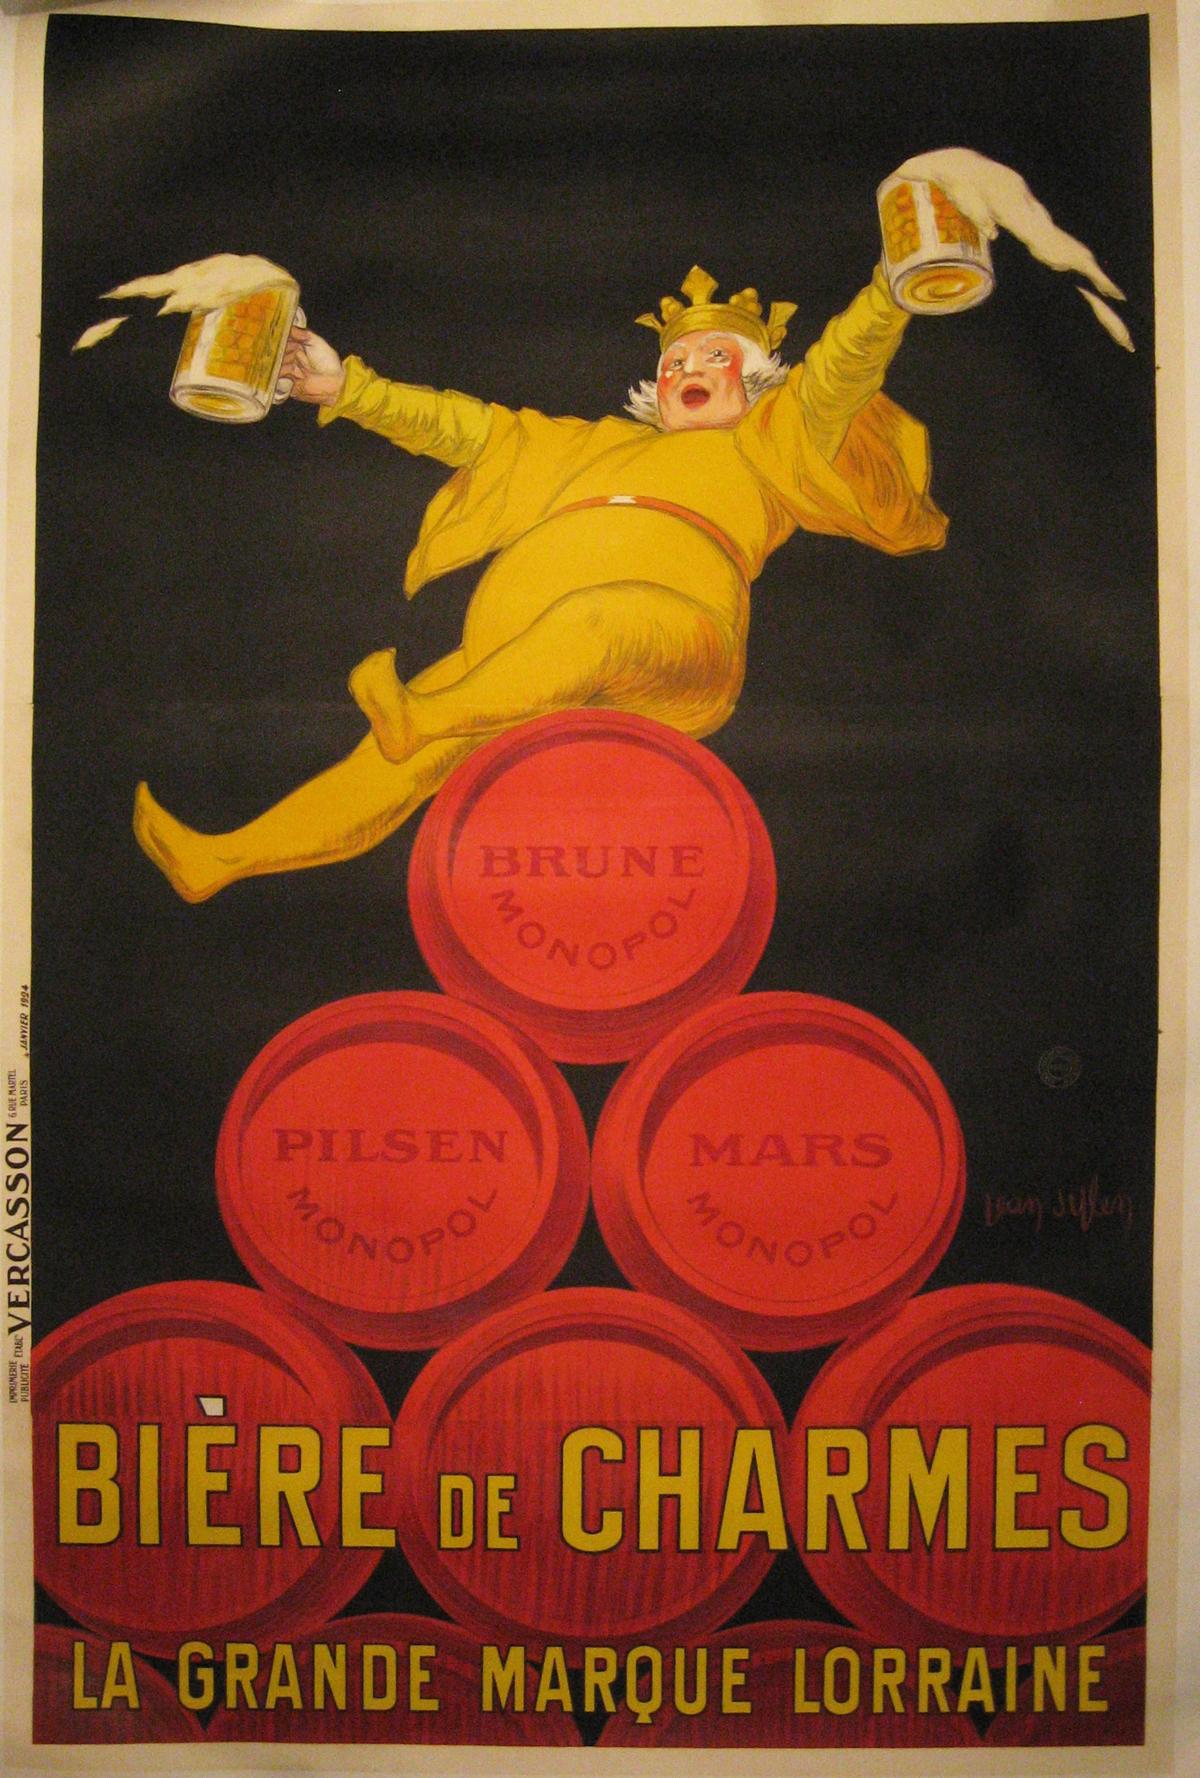 Monopol Biere de Charmes – Yellow Beer King In Good Condition For Sale In Sag Harbor, NY